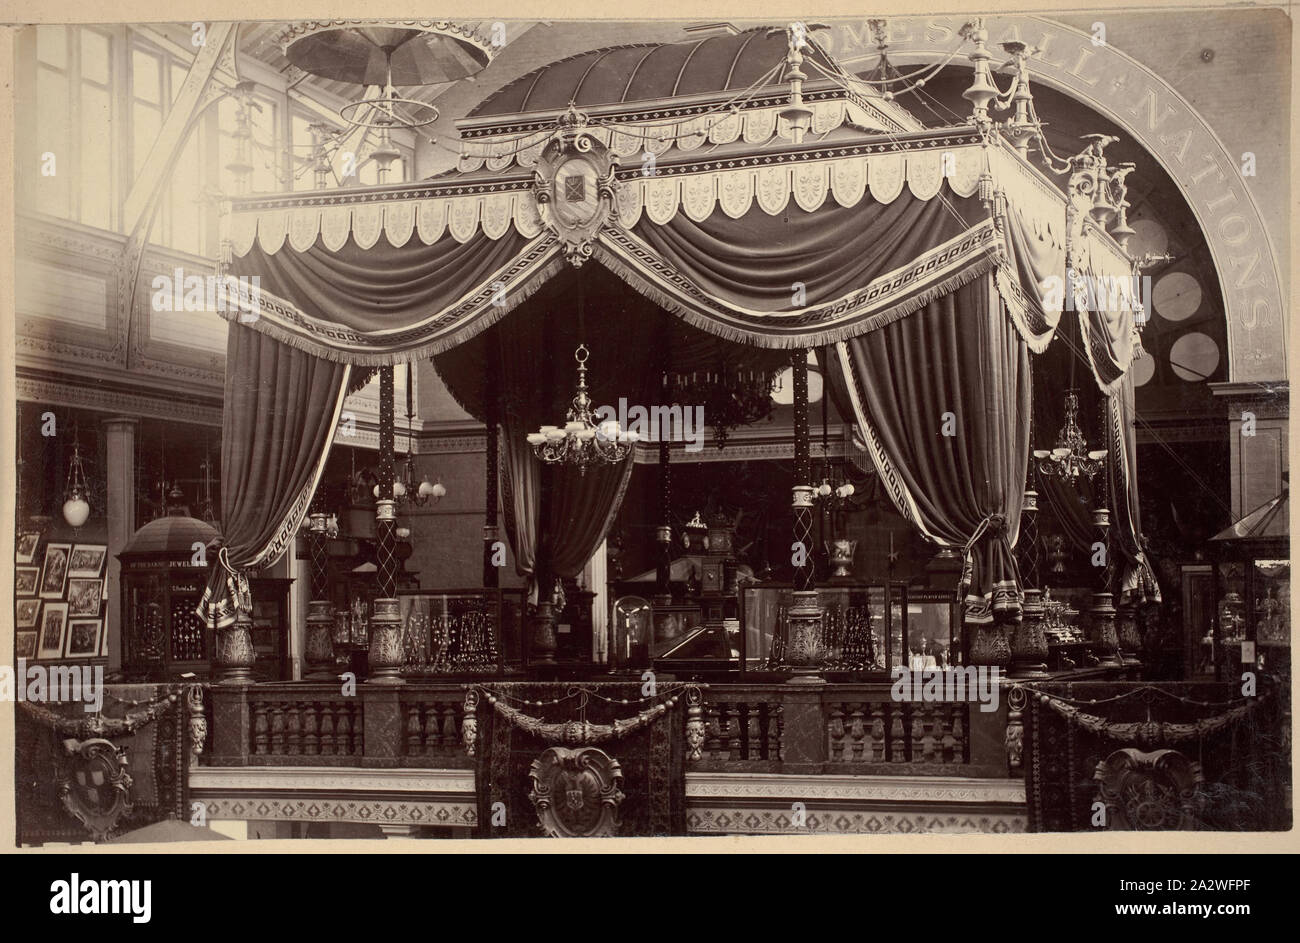 Photograph - German Imperial Tent, North Transept, Great Hall, Exhibition Building, 1880-1881, View of the German Imperial Tent on the balcony of the north transept of the Great Hall of the permanent Exhibition Building at the 1880 Melbourne International Exhibition held at the Exhibition Buildings, Carlton Gardens, between 1 October 1880 and 30 April 1881. While the official plans for the exhibition show Germany having been allocated various court space in at least three different areas Stock Photo